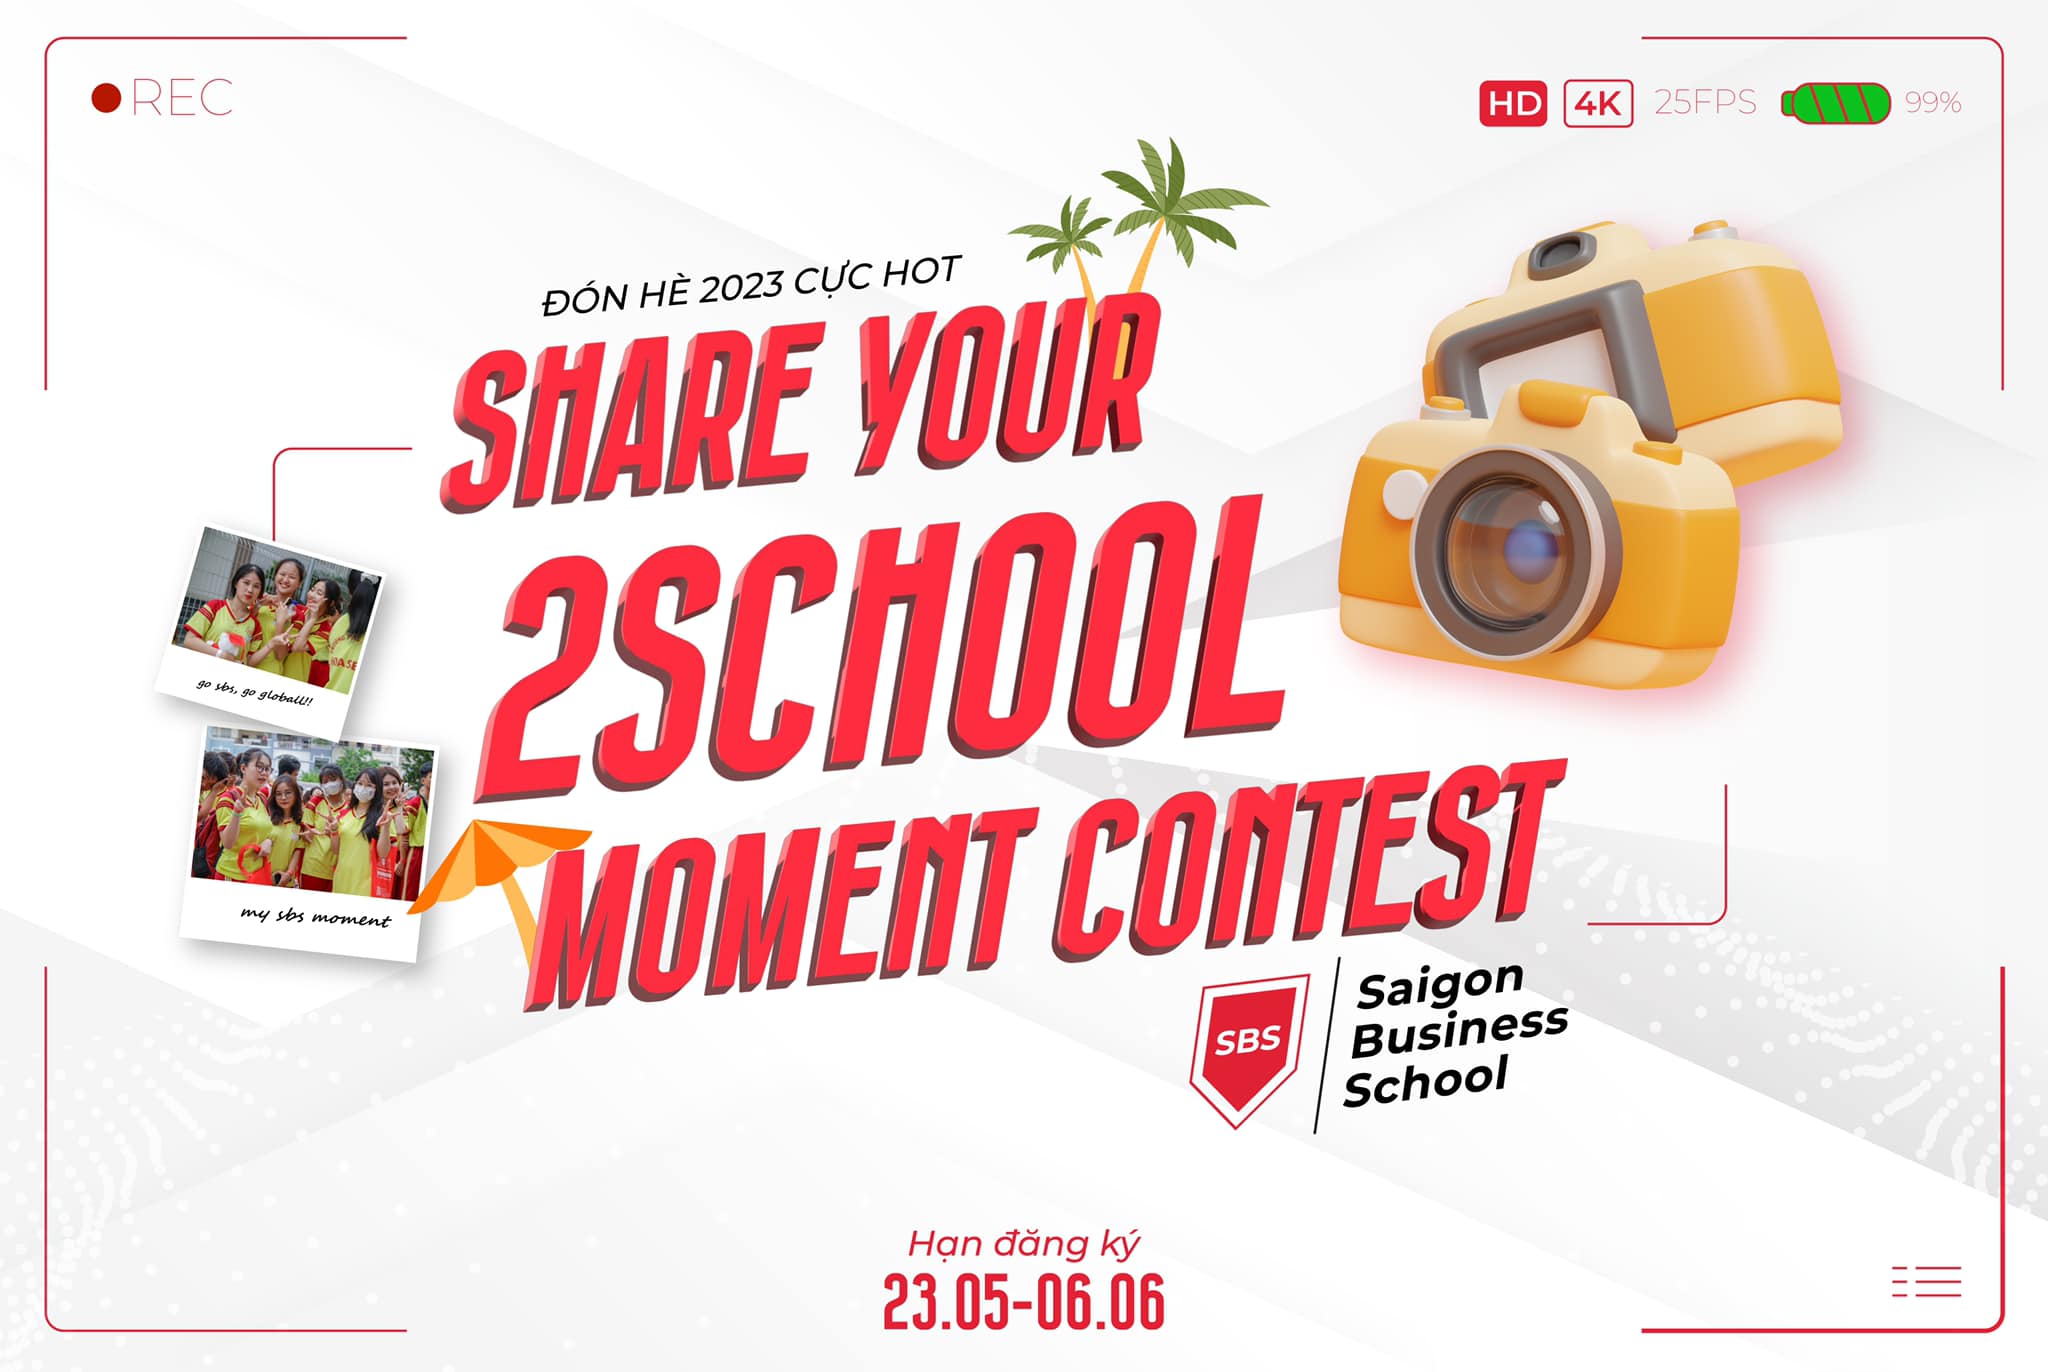 SHARE YOUR 2SCHOOL MOMENT CONTEST